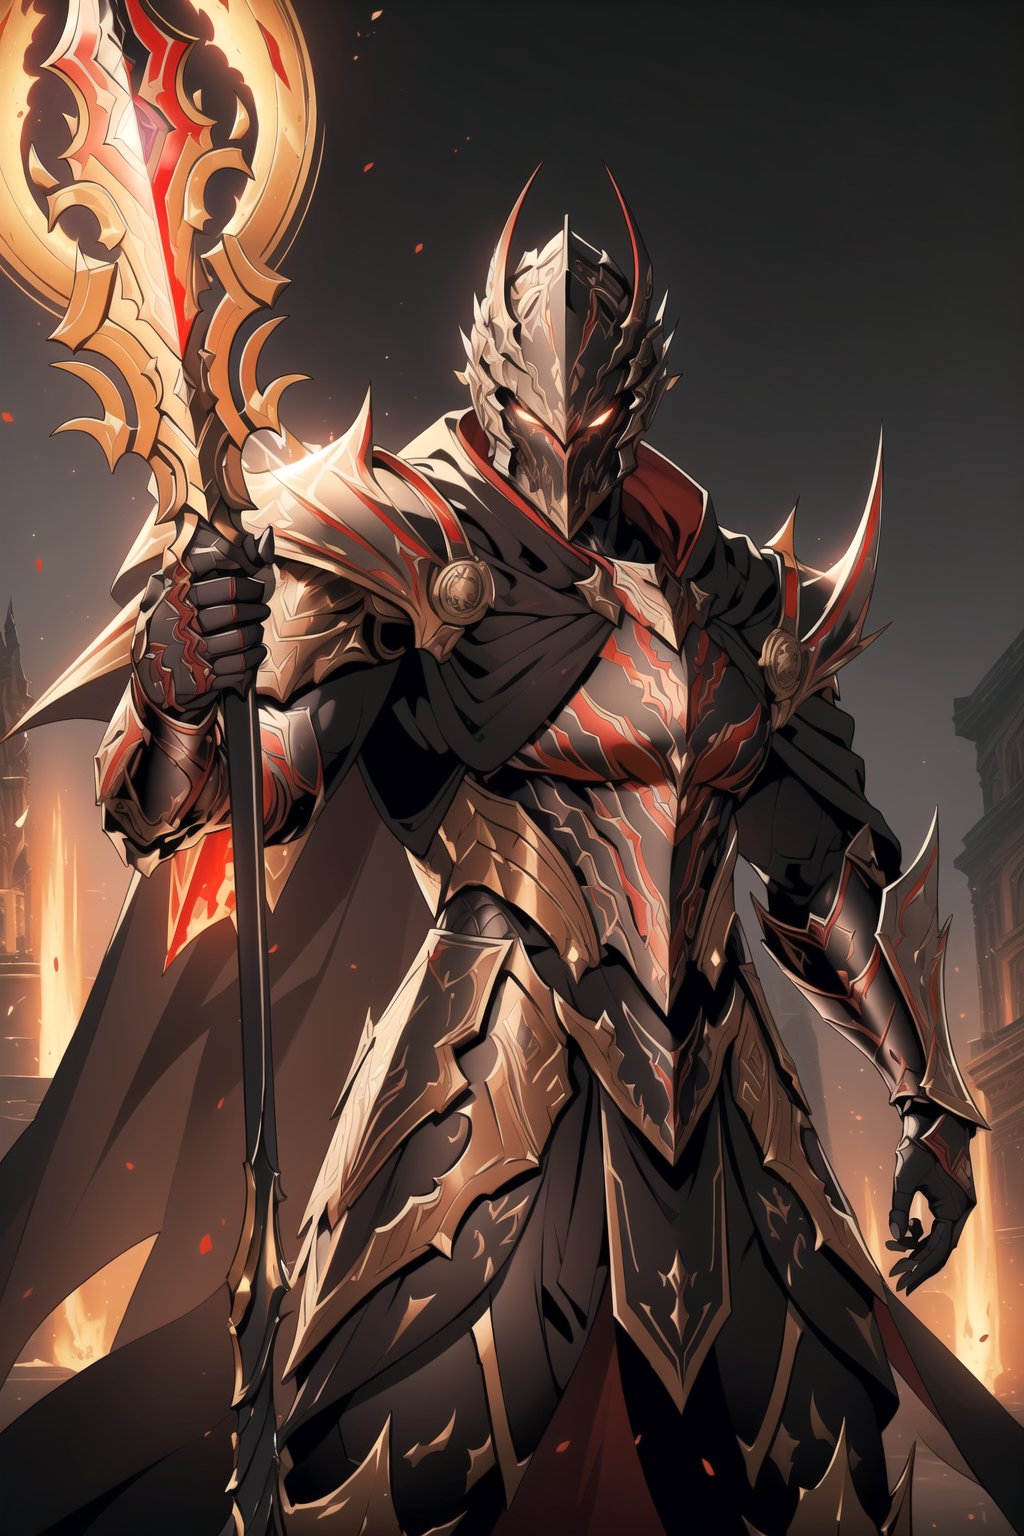 (Masterpiece, Best Quality), (Spartan Warrior in Warframe Style Armor), (Masculine Appearance:1.4), (Muscular Frame Build:1.2), (Glowing Golden Eyes), (Wearing Red and Black Spartan-Themed Armor and Black Flowing Cloak:1.4), (Wielding a Flaming Sword and Shield:1.4), (Colloseum Arena at Noon:1.2), (Action Pose:1.4), Centered, (Half Body Shot:1.4), (From Front Shot:1.2), Insane Details, Intricate Face Detail, Intricate Hand Details, Cinematic Shot and Lighting, Realistic and Vibrant Colors, Sharp Focus, Ultra Detailed, Realistic Images, Depth of Field, Incredibly Realistic Environment and Scene, Master Composition and Cinematography, castlevania style,castlevania style,WARFRAME